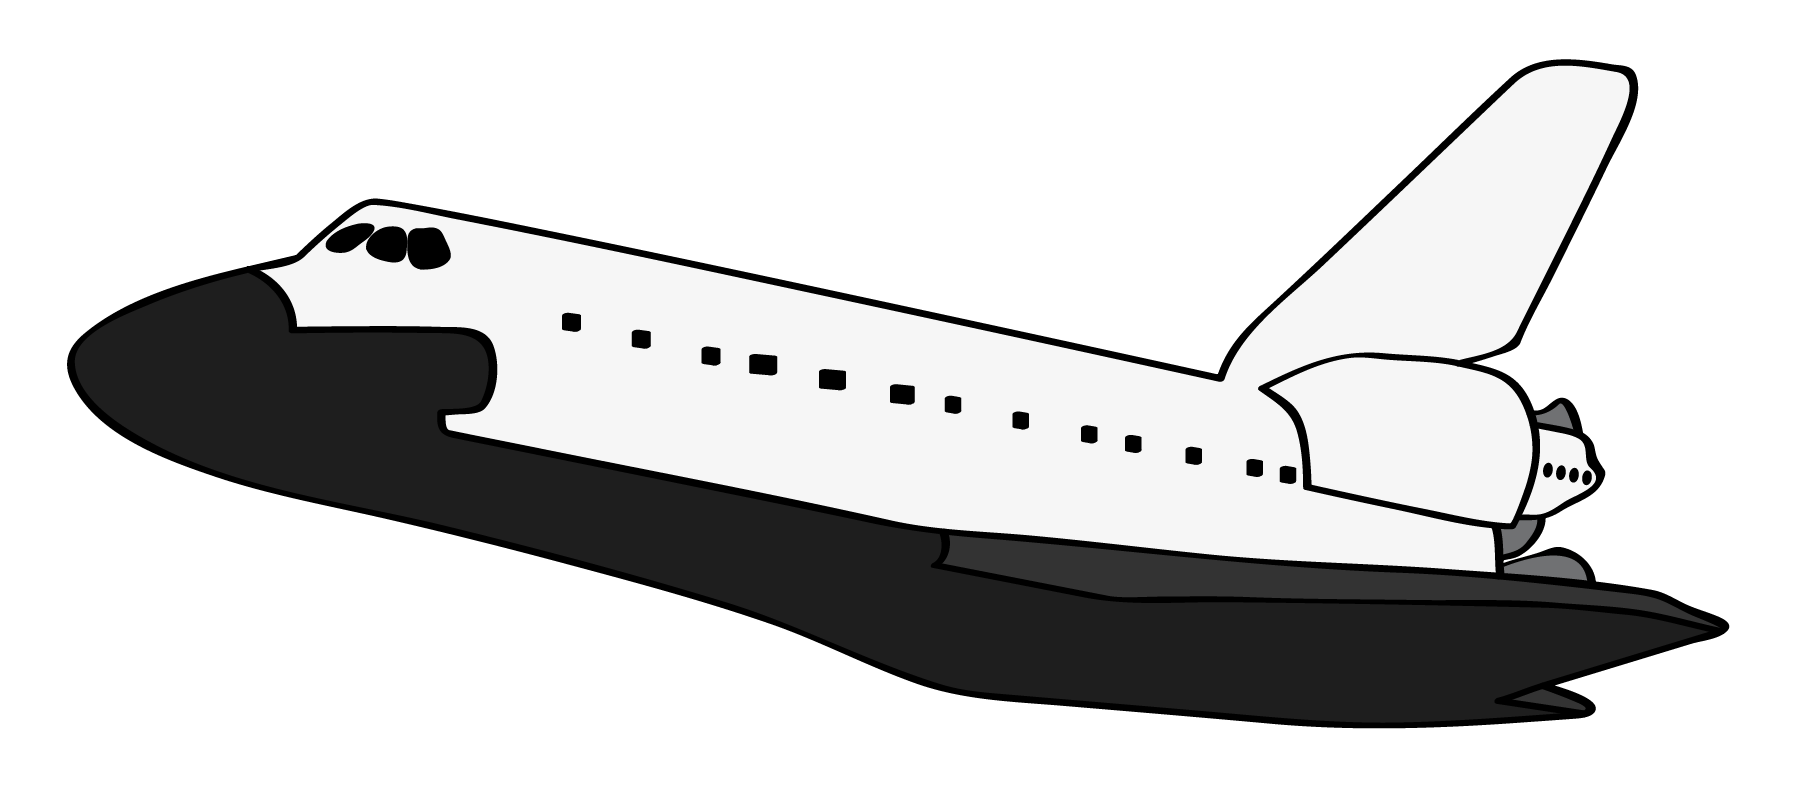 Space Shuttle clipart #19, Download drawings